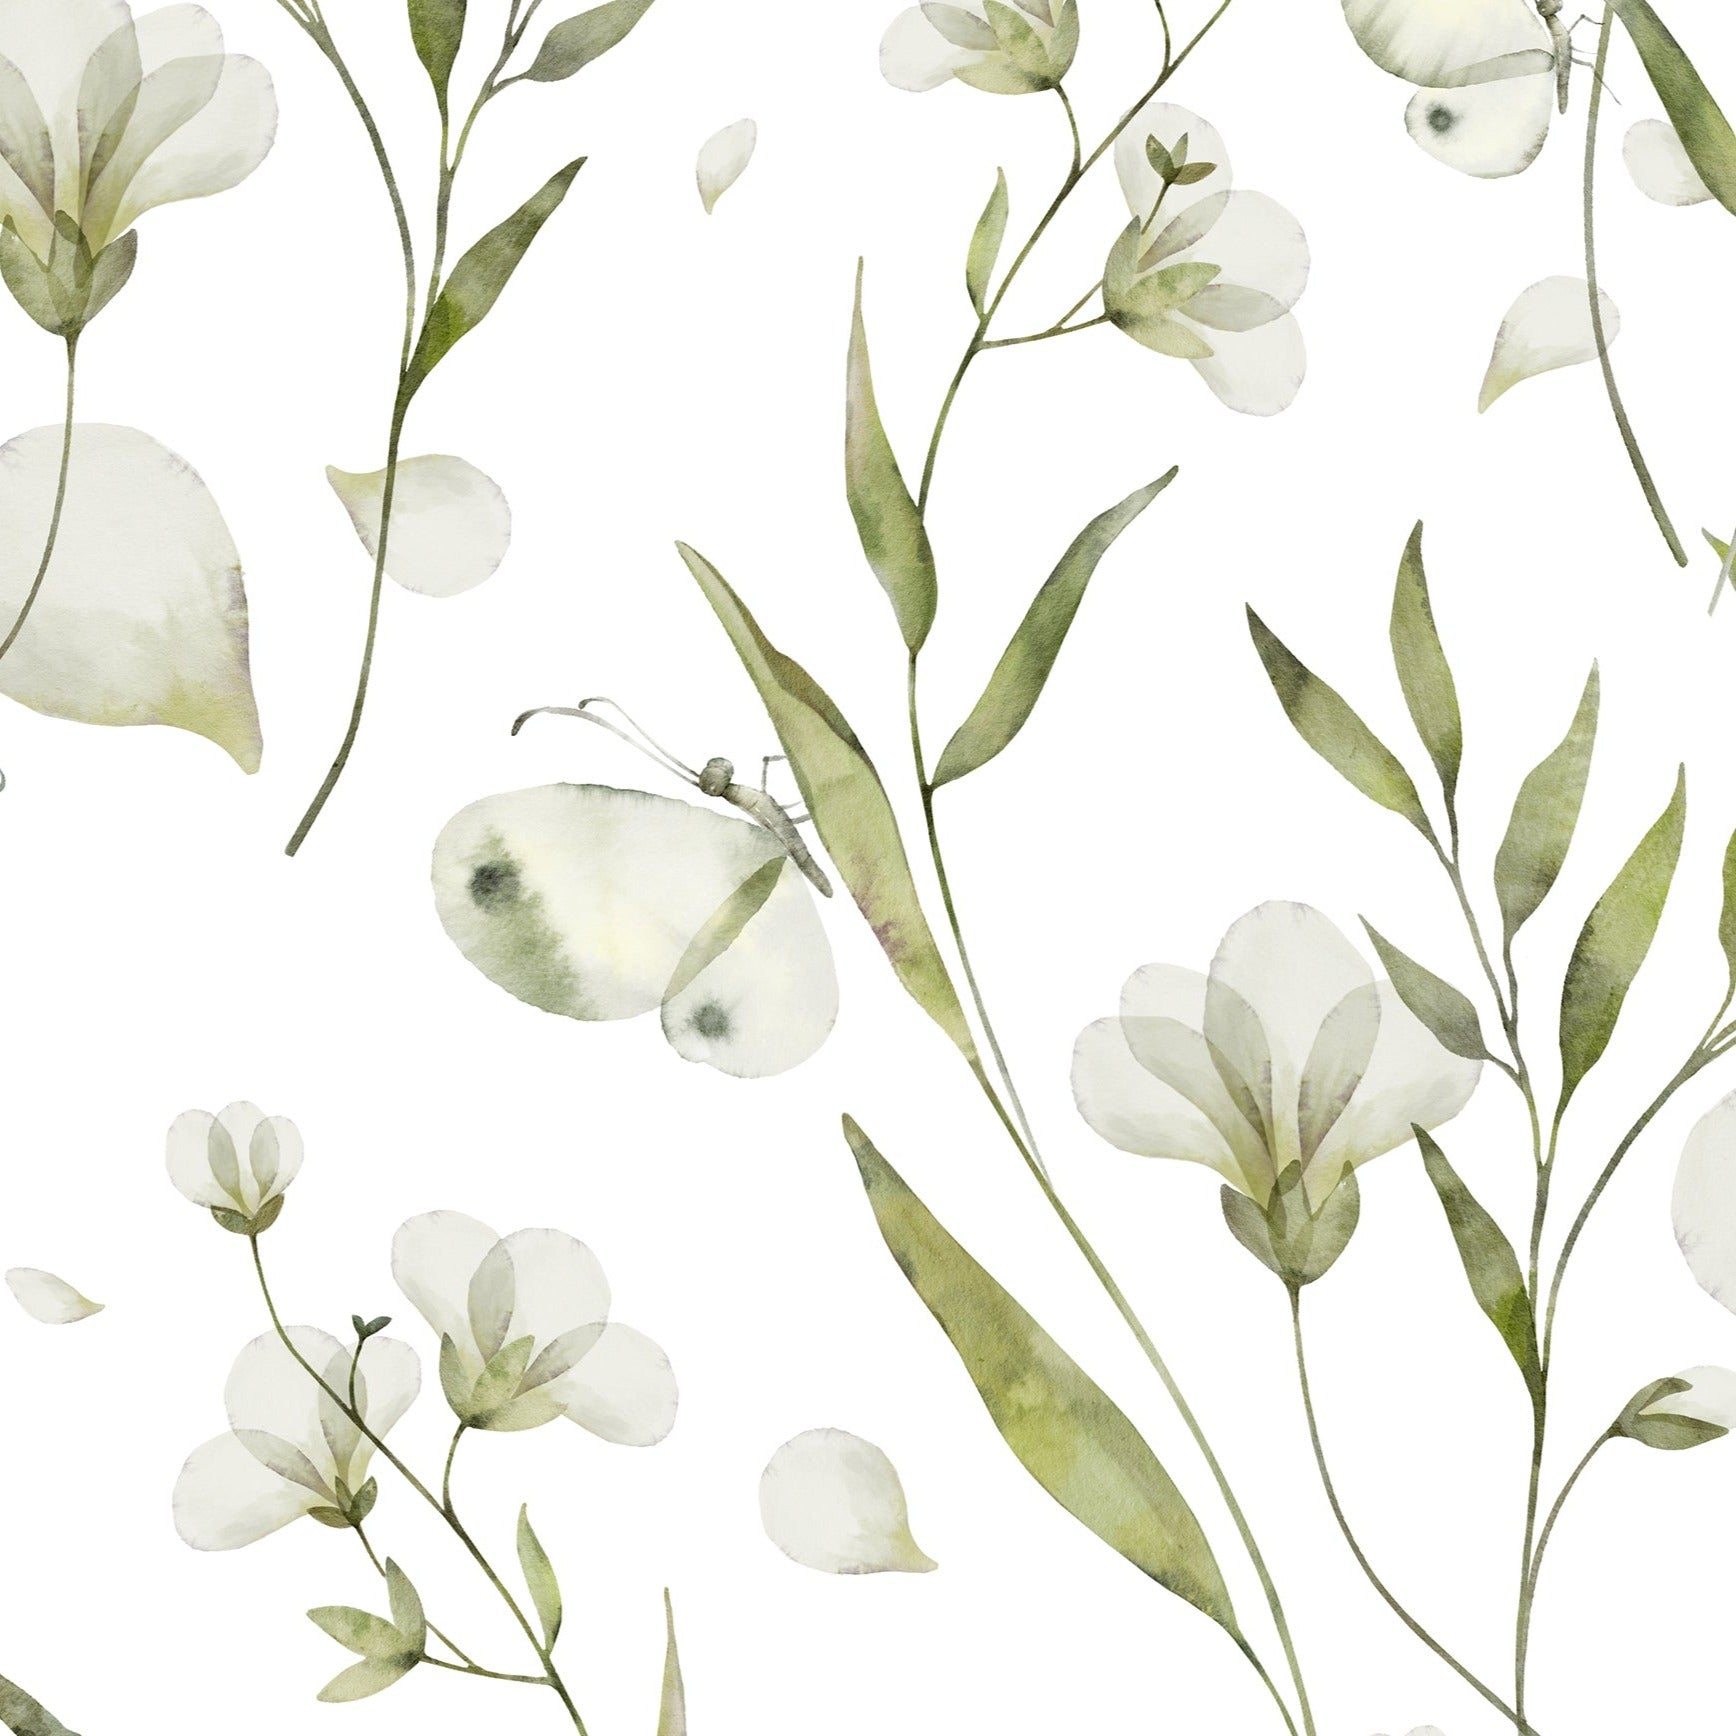 Detail of the 'Botanical Bliss Wallpaper' showcasing its delicate design of green leaves and white flowers with subtle green shading, all set against a clean white background. The watercolor effect gives the botanical elements a gentle and naturalistic appearance, perfect for creating a tranquil space.